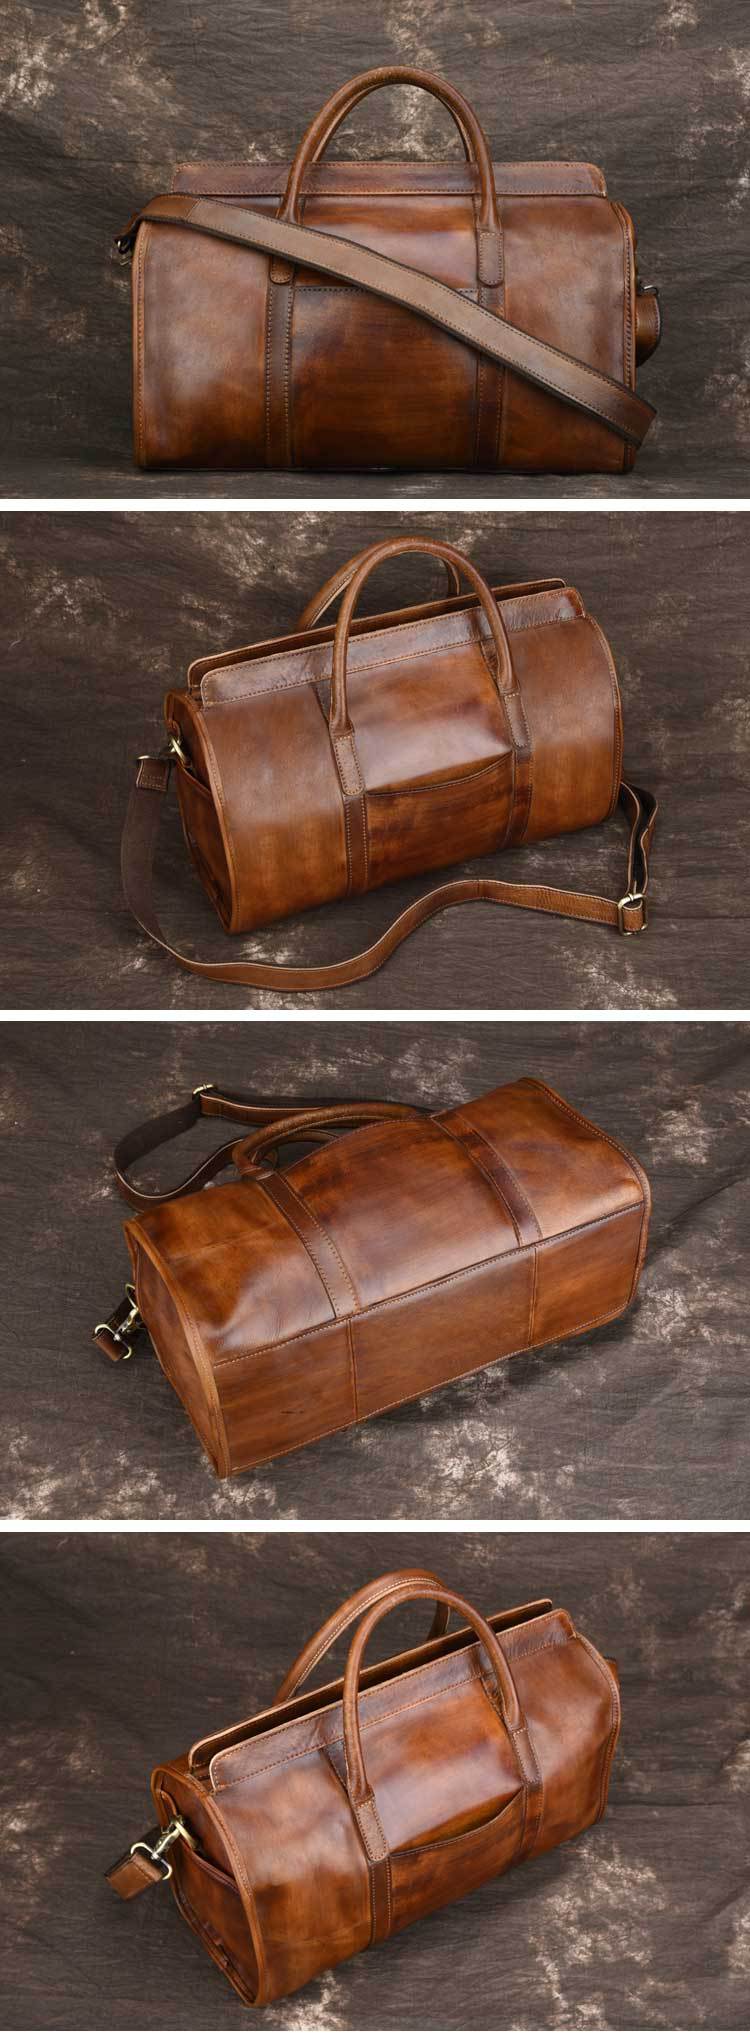 High-quality leather luggage for men.